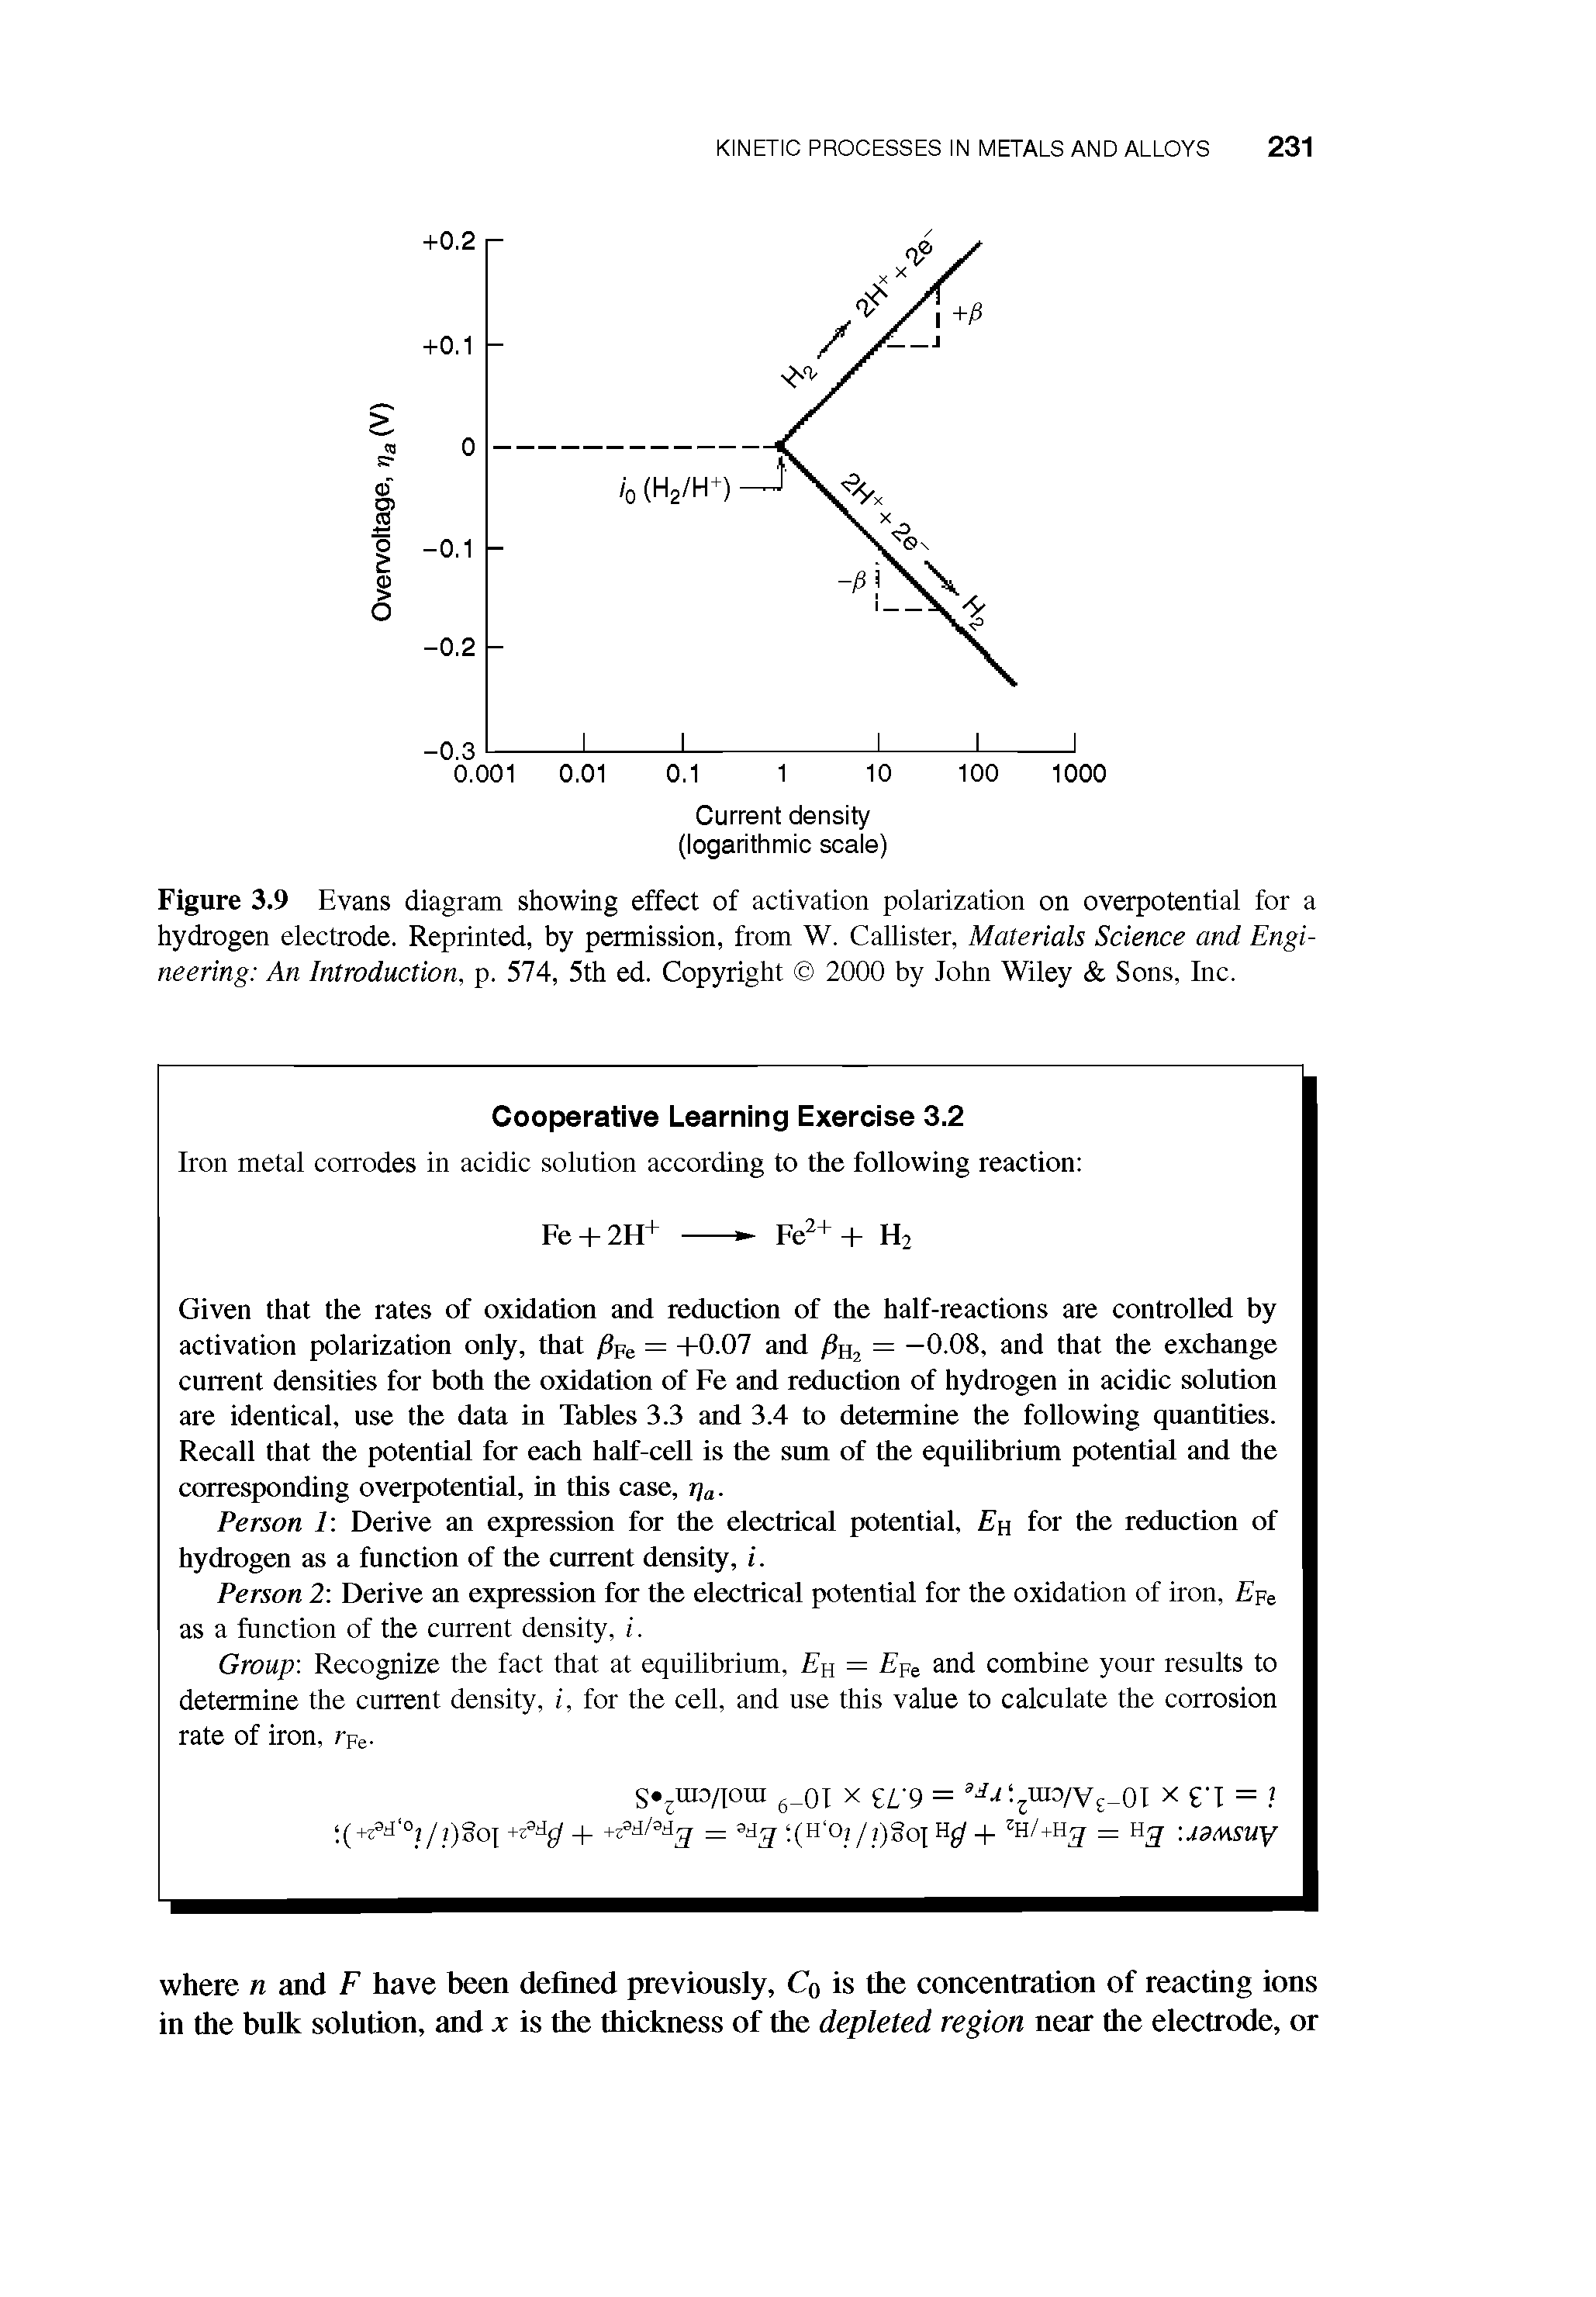 Figure 3.9 Evans diagram showing effect of activation polarization on overpotential for a hydrogen electrode. Reprinted, by permission, from W. Callister, Materials Science and Engineering An Introduction, p. 574, 5th ed. Copyright 2000 by John Wiley Sons, Inc.